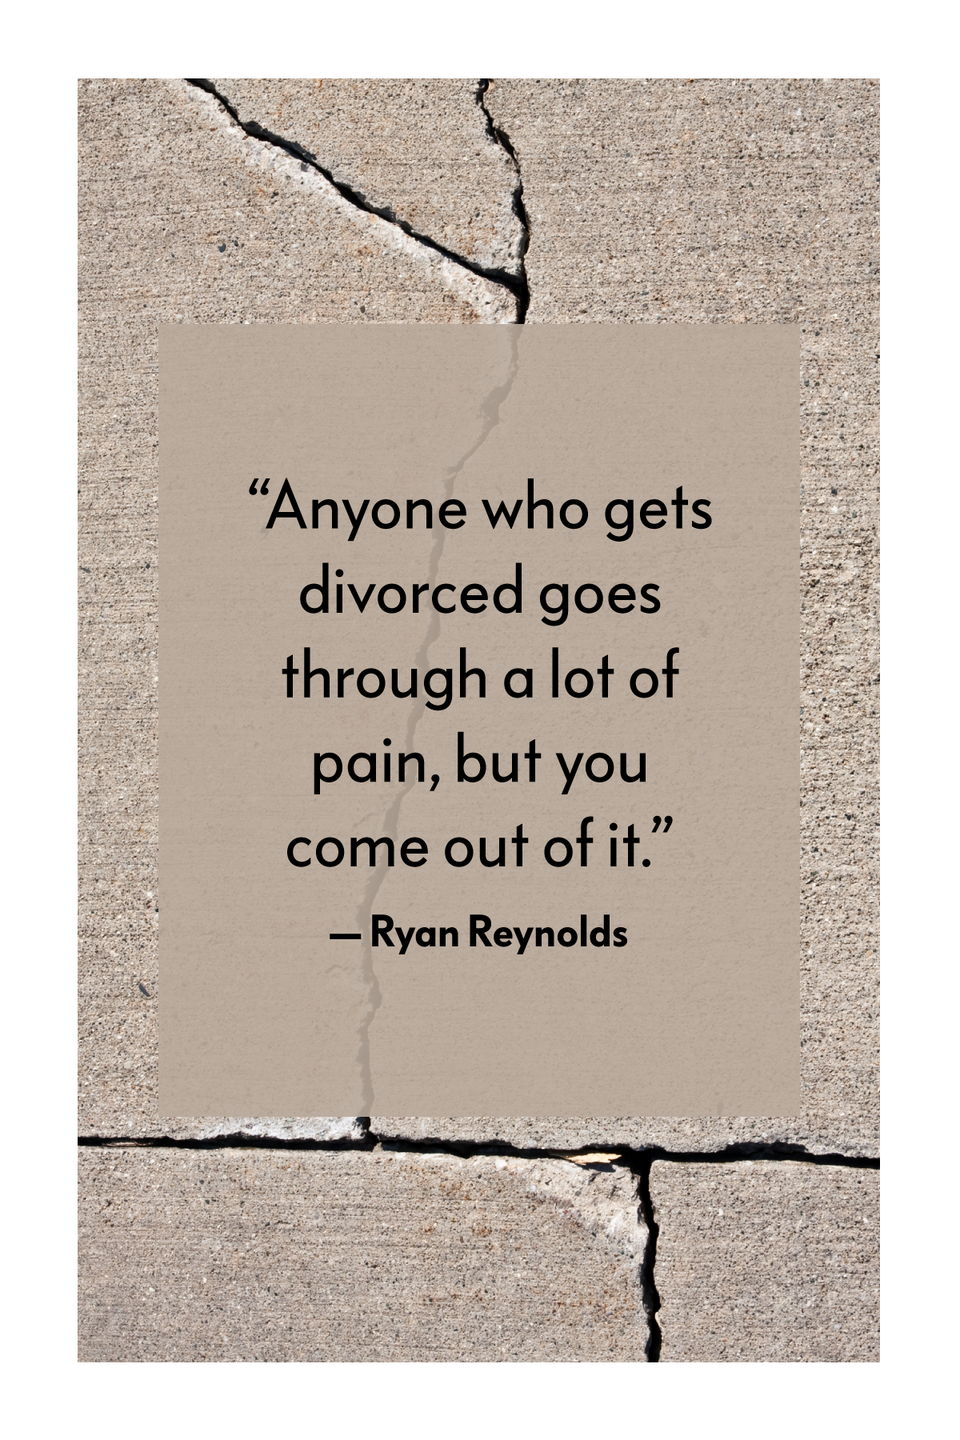 35 Empowering Quotes About Divorce to Help You Get Through